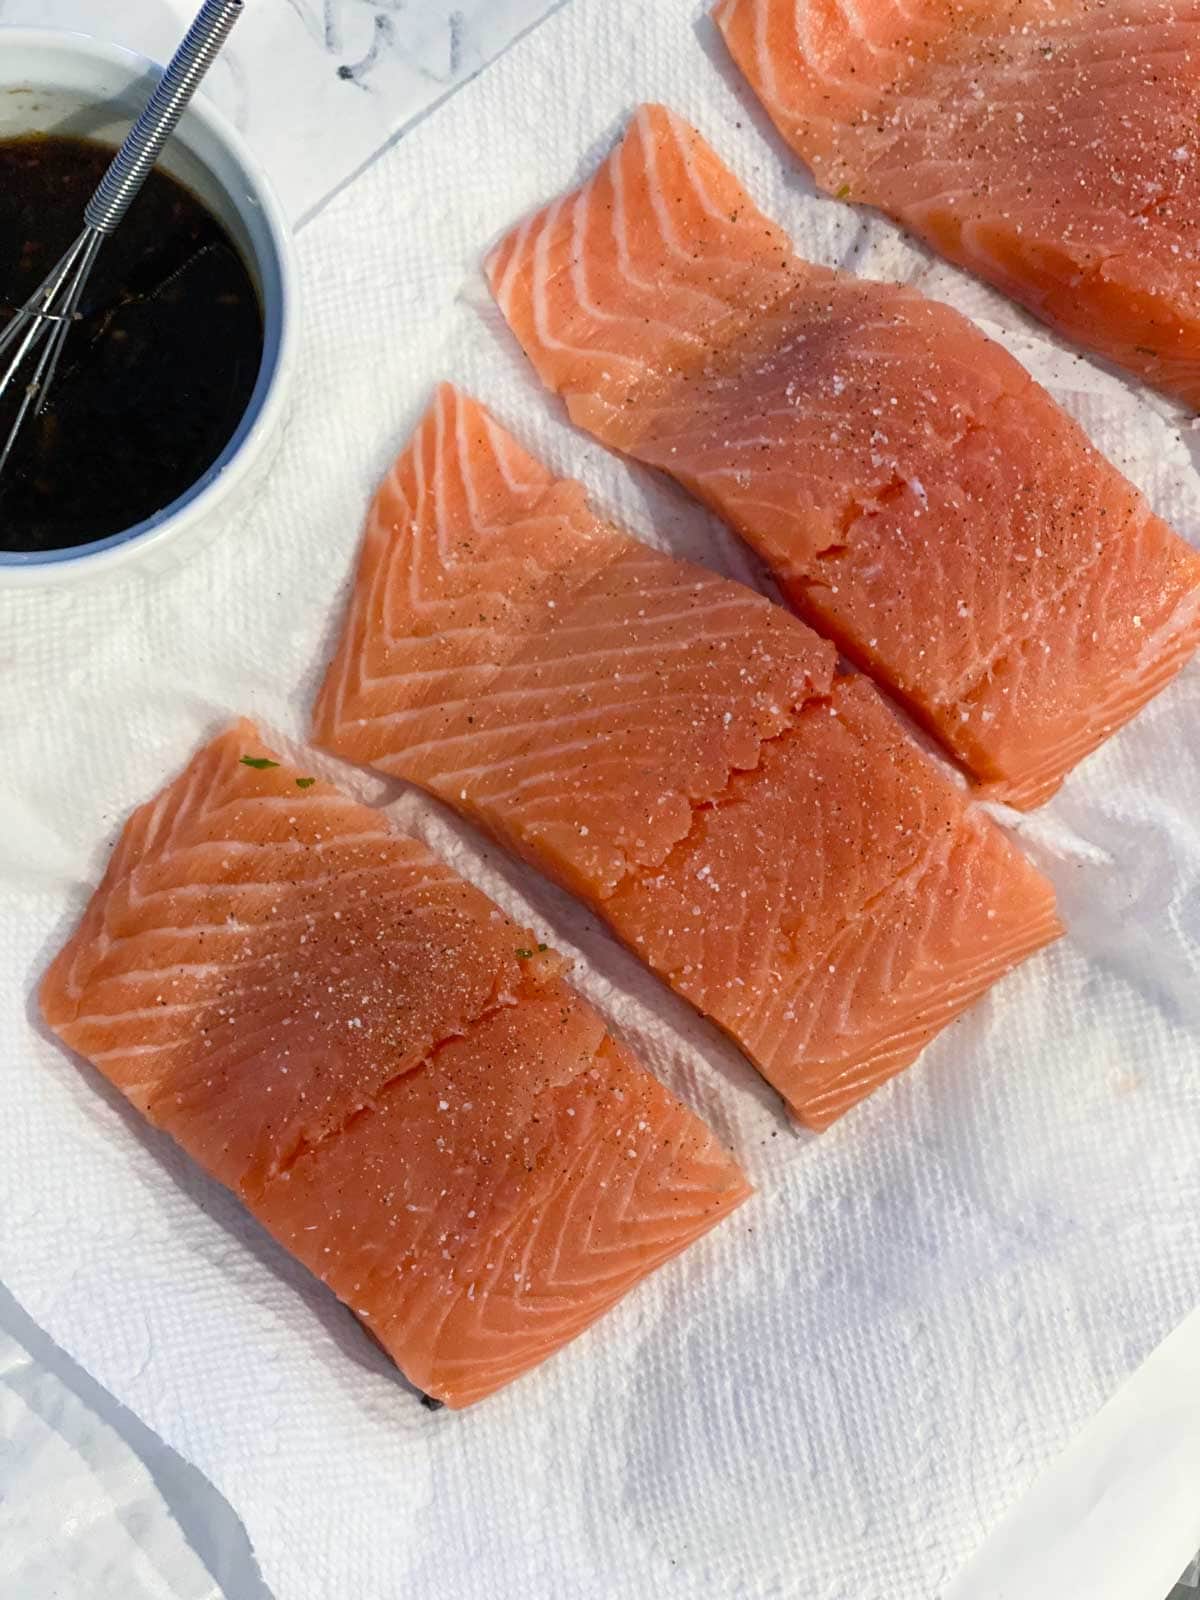 Four raw salmon fillets on a paper towel next to teriyaki sauce in a white bowl with a whisk.